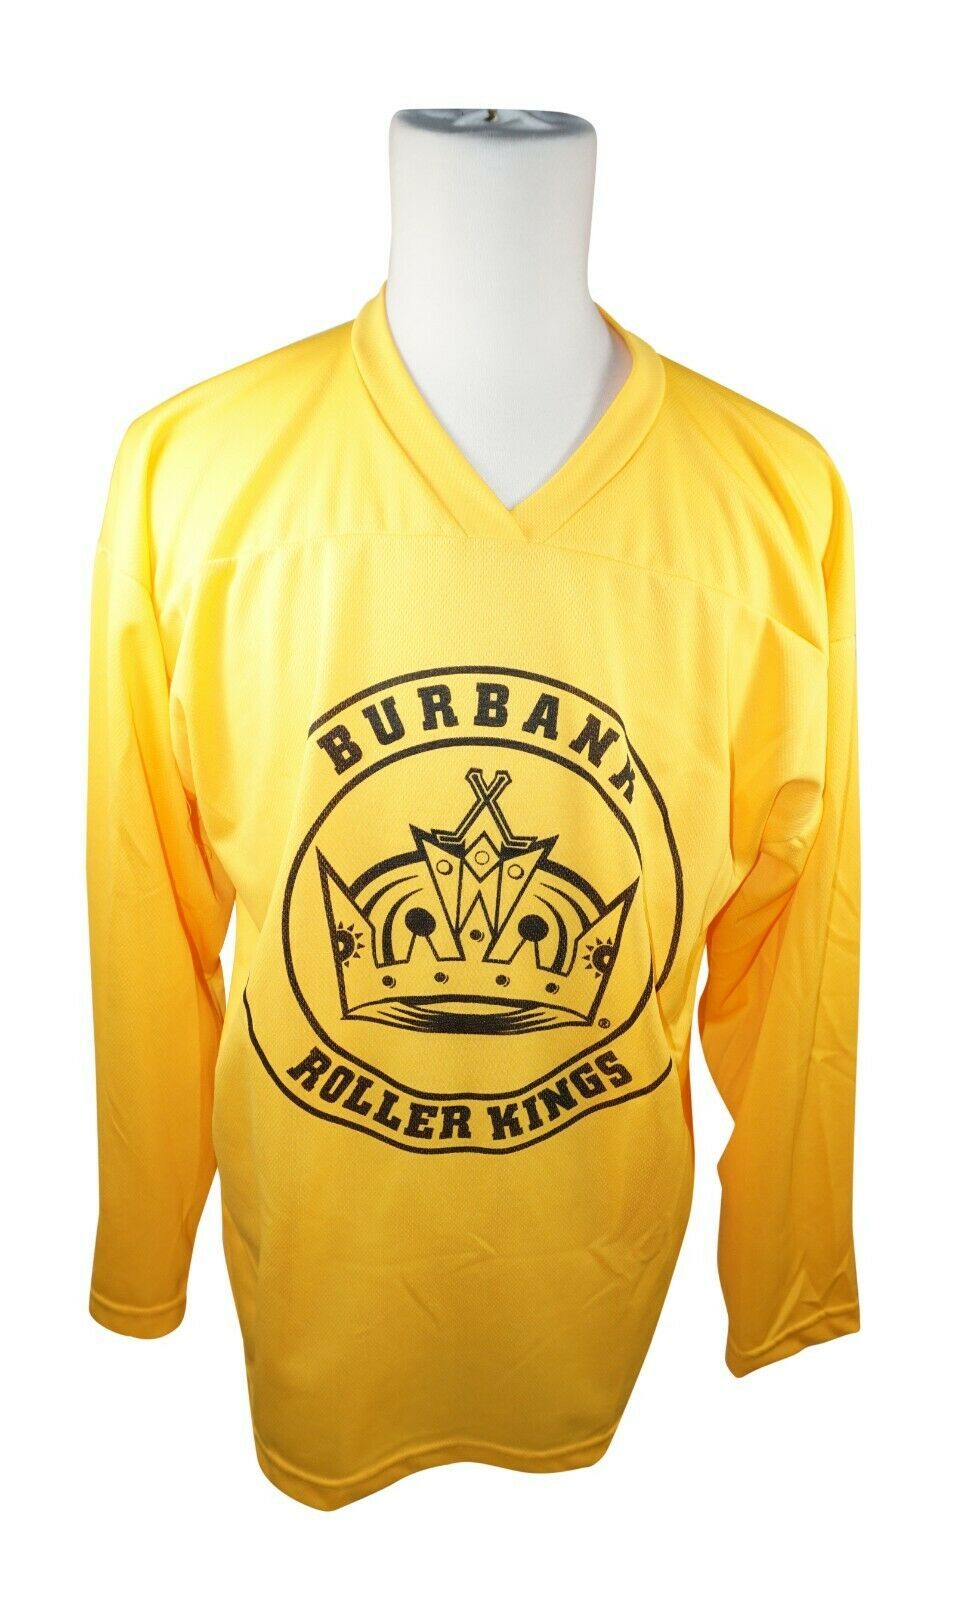 Primary image for XTREME BASICS SR S BURBANK HOCKEY YELLOW JERSEY #73 ADULT SMALL ICE ROLLER USED